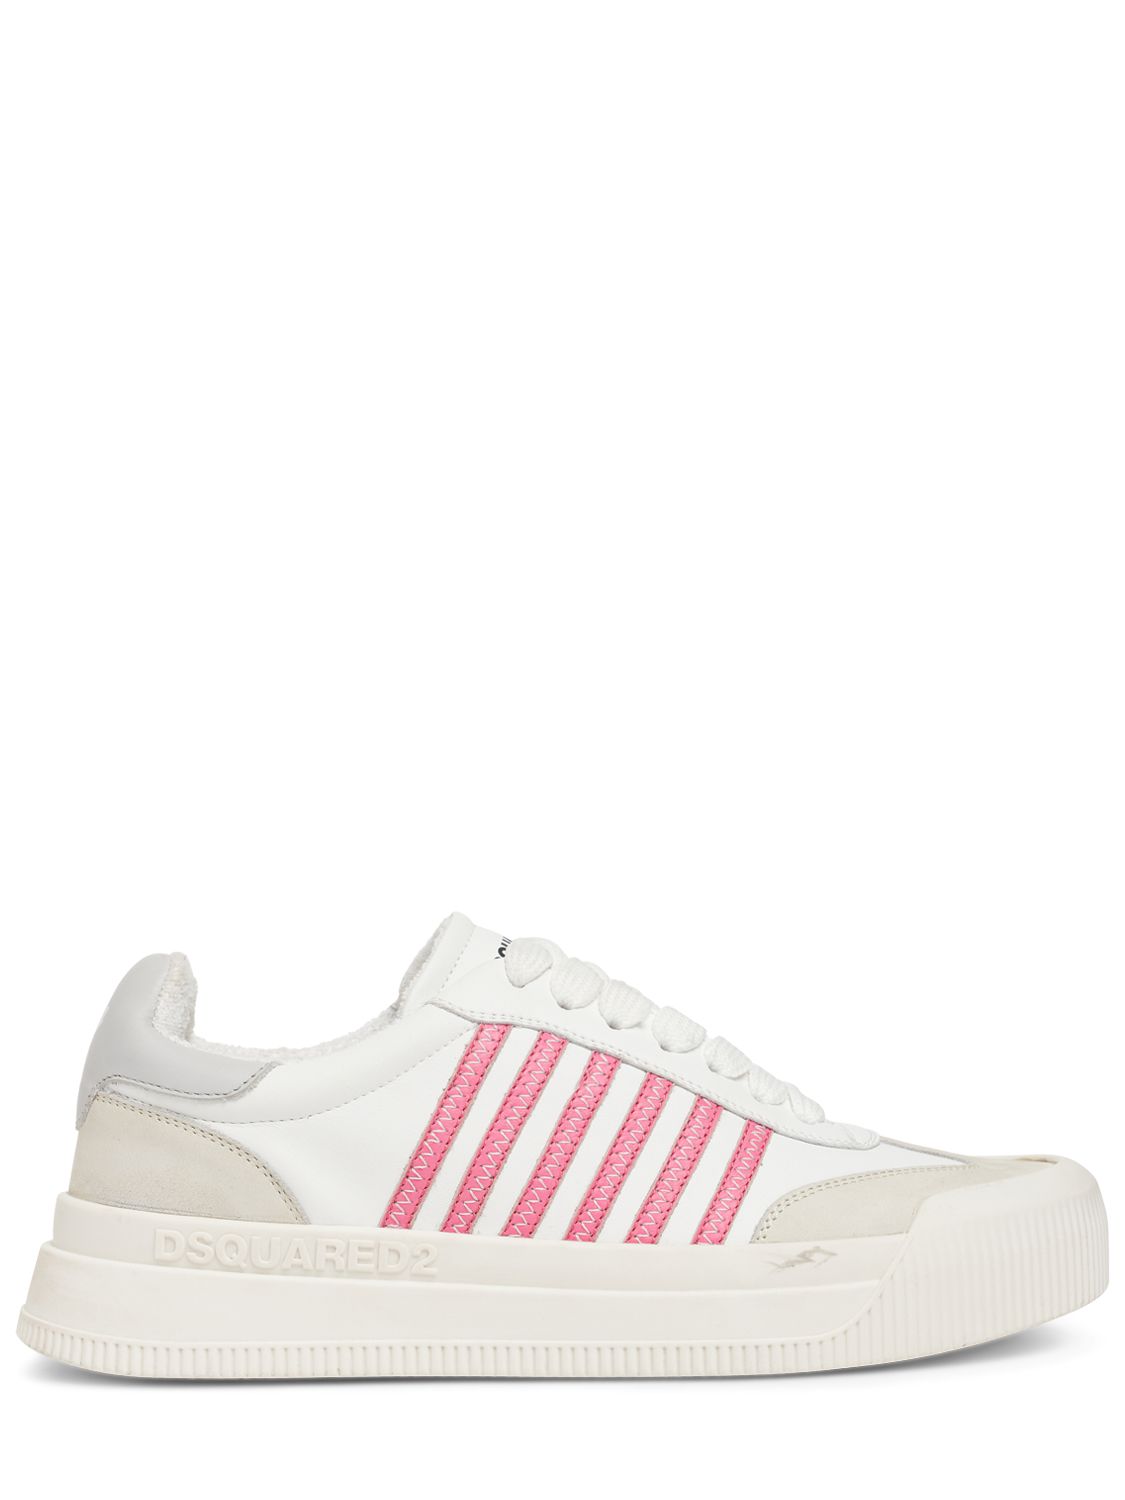 New Jersey Leather Sneakers - DSQUARED2 - Modalova